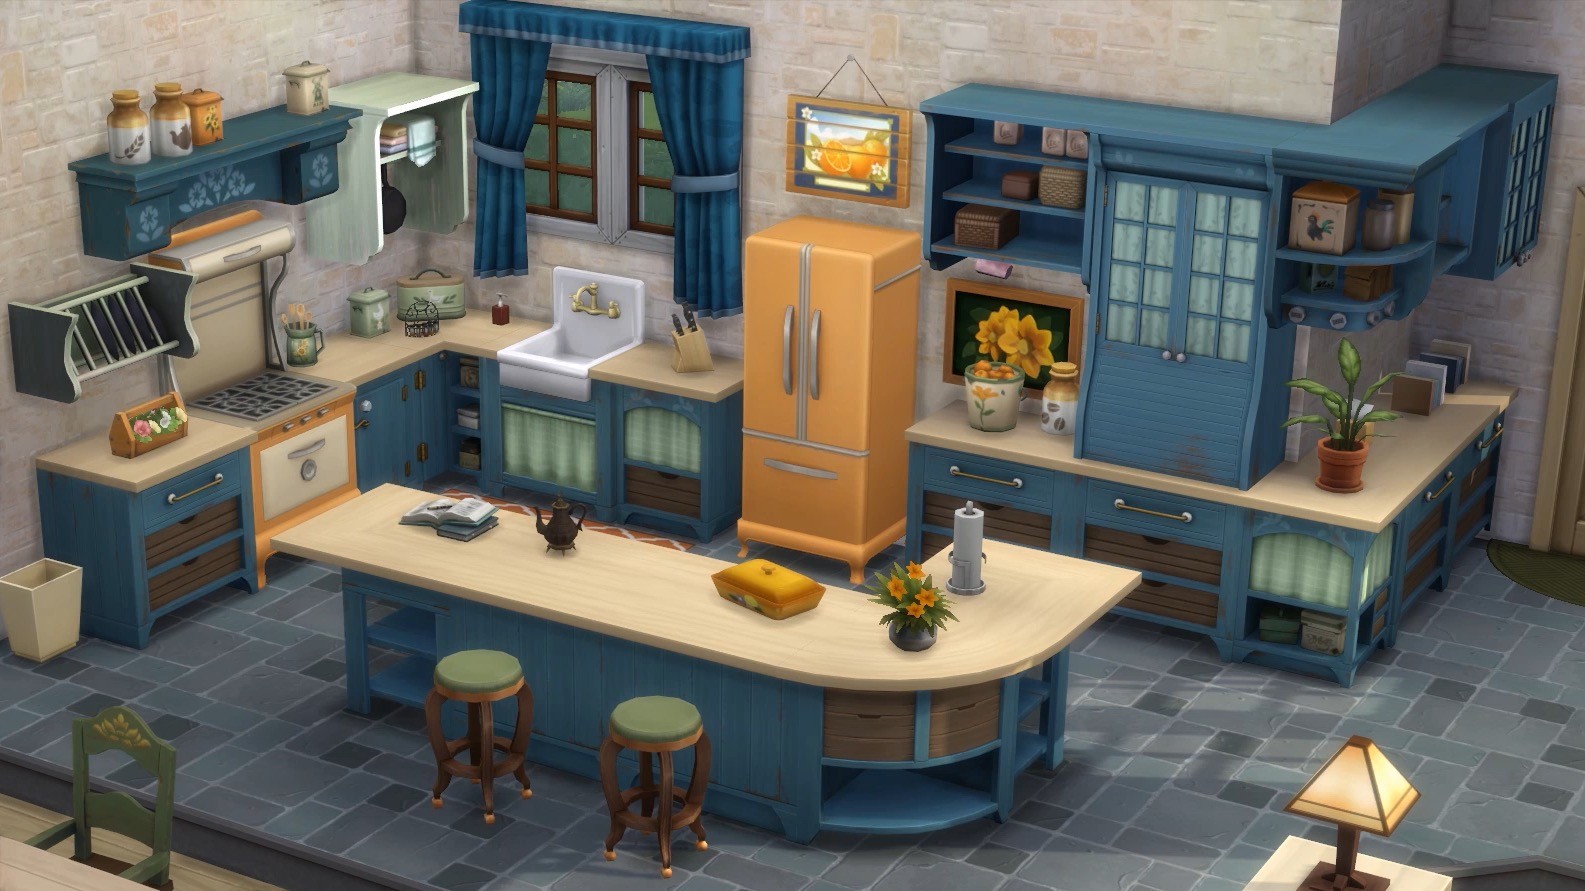 Electronic Arts Releases "The Sims 4 Country Kitchen Kit" SimsVIP